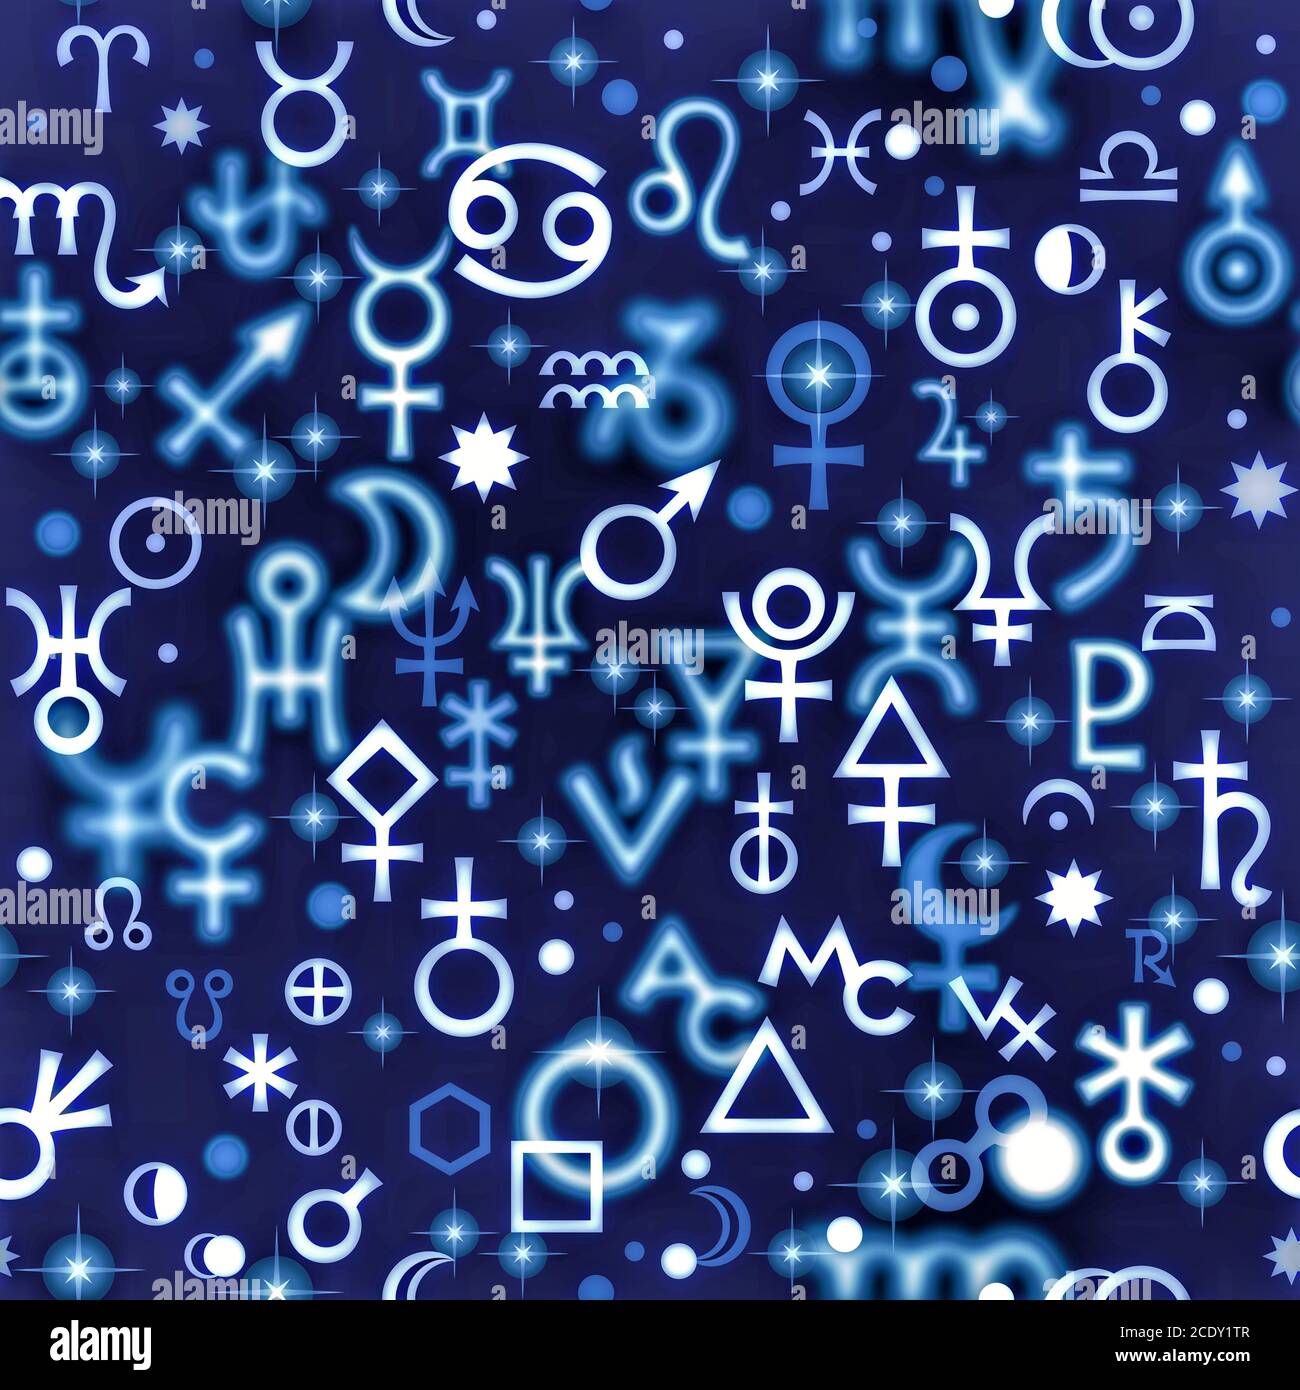 Astrological hieroglyphic signs, Mystic kabbalistic symbols. Twilight background, chaotic seamless pattern. Stock Photo